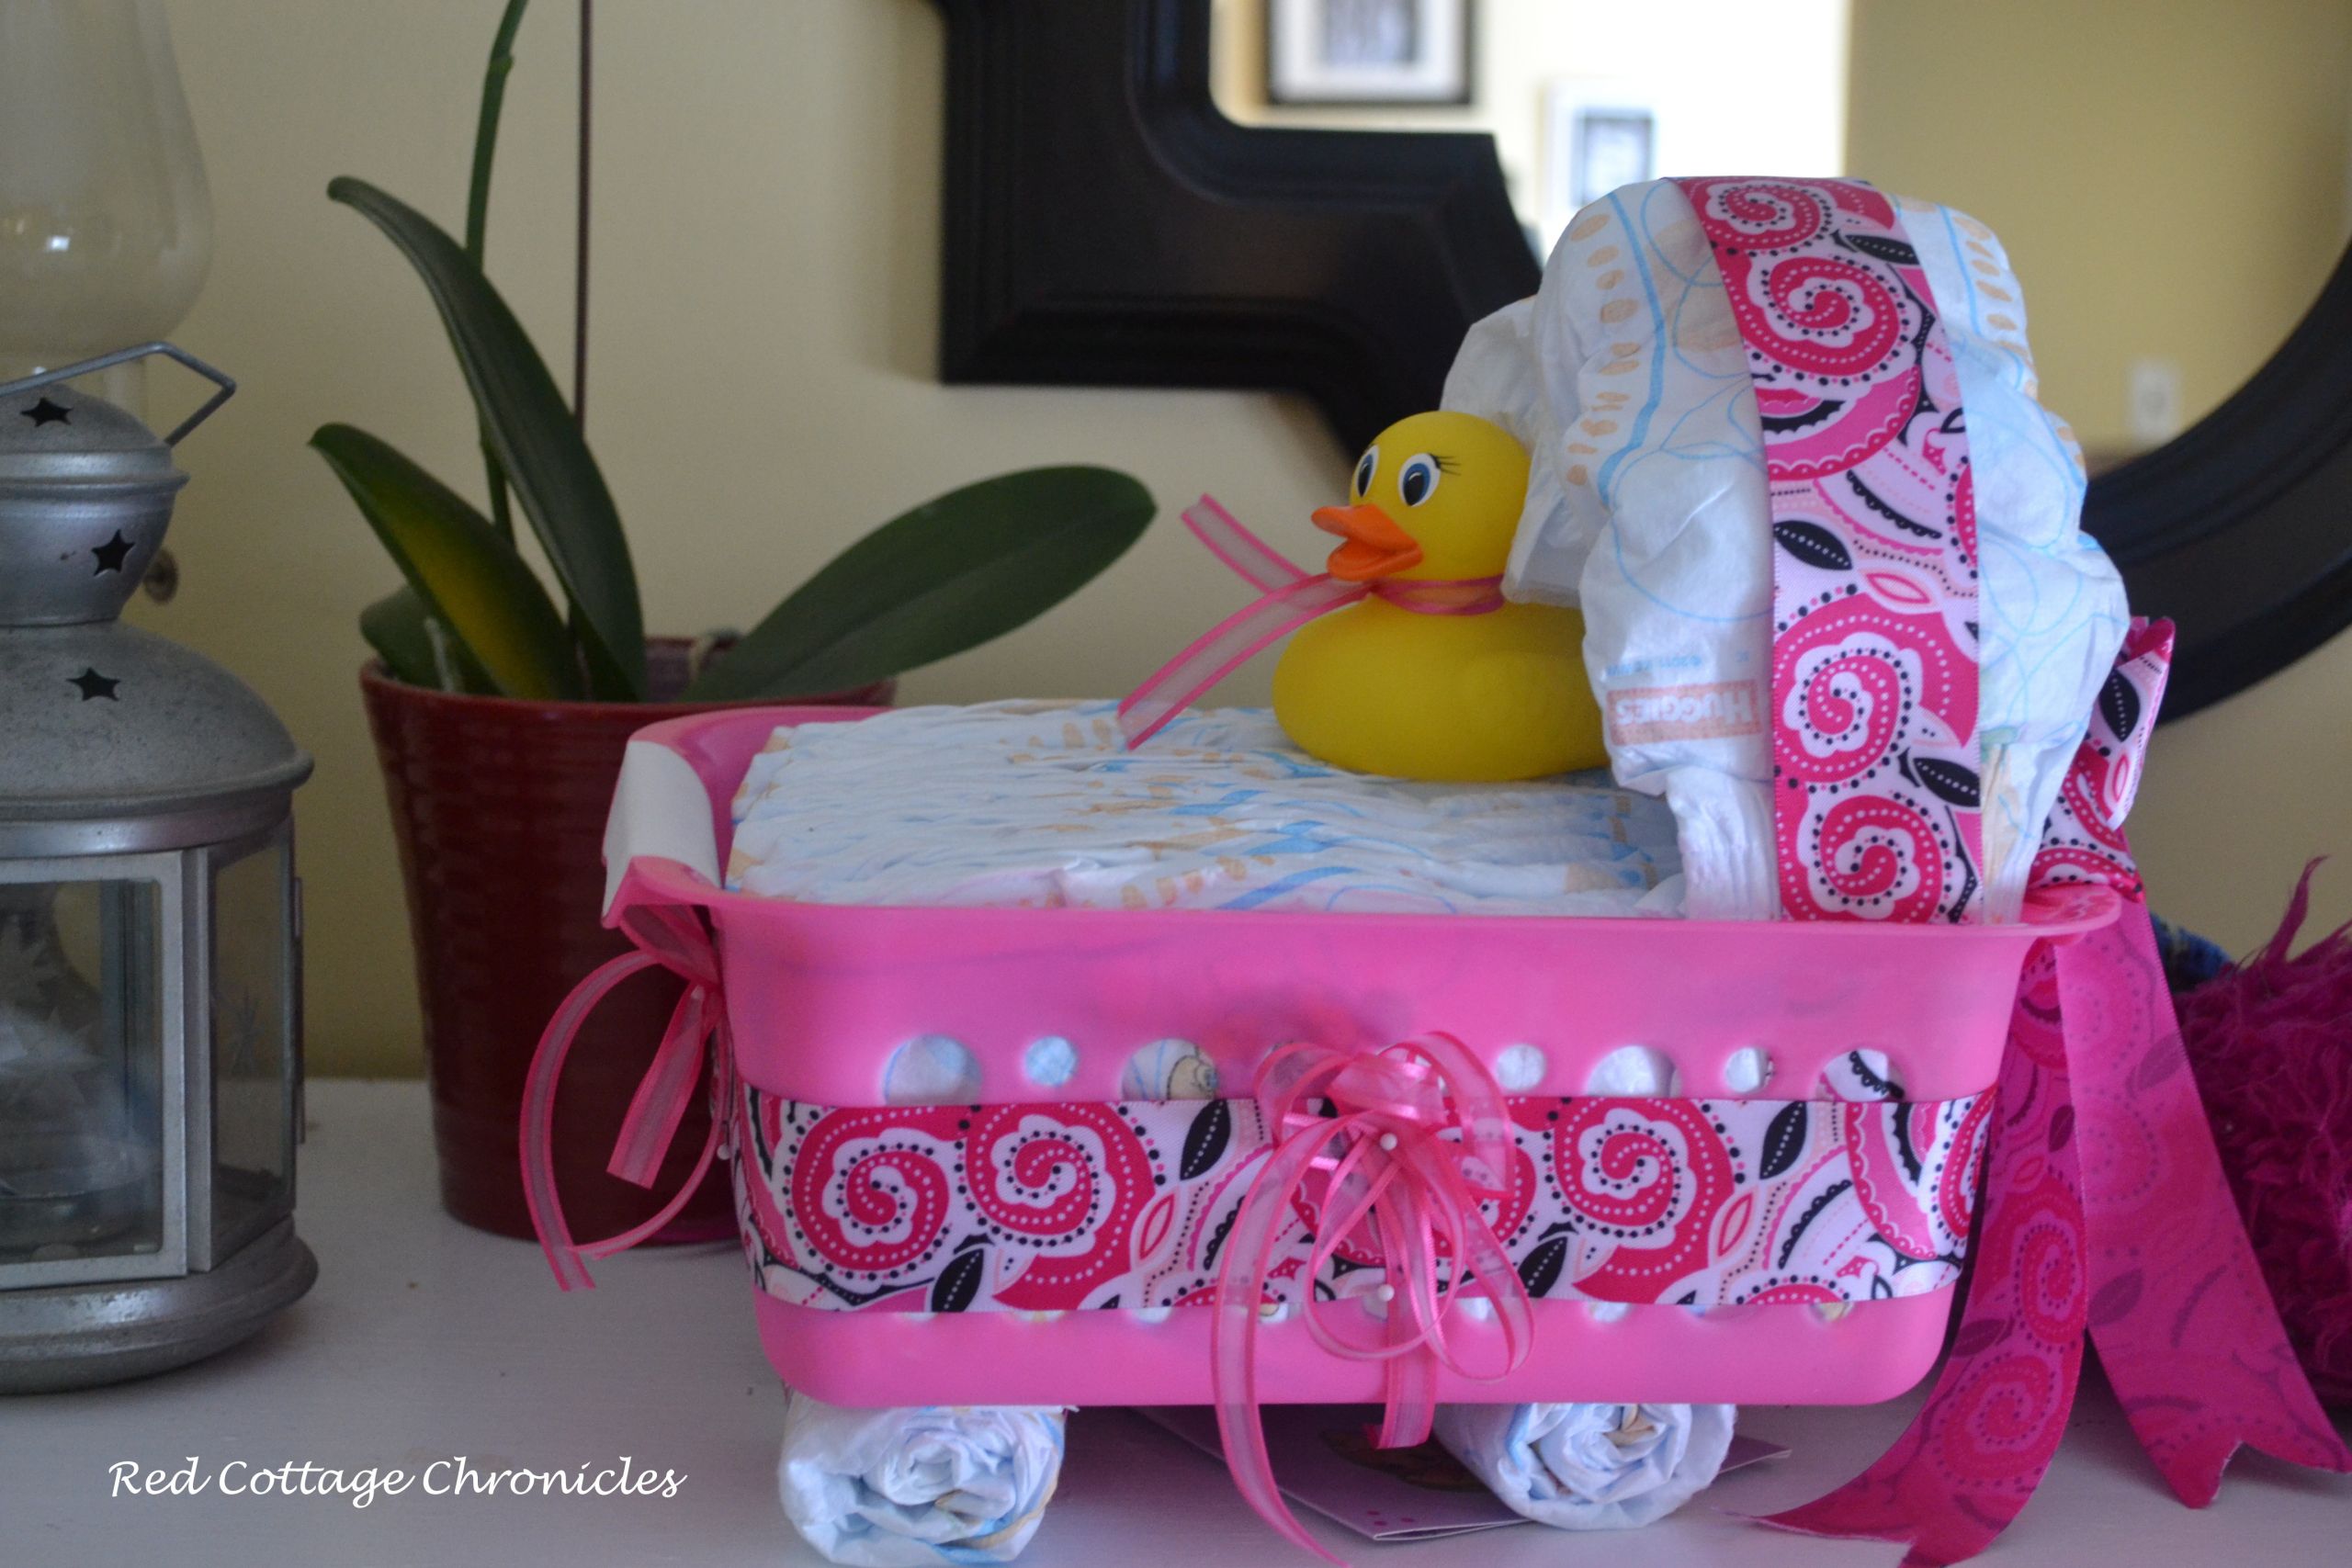 Creative Baby Shower Gifts For Girl
 This Baby Shower Gift Idea is a practical t any new mom